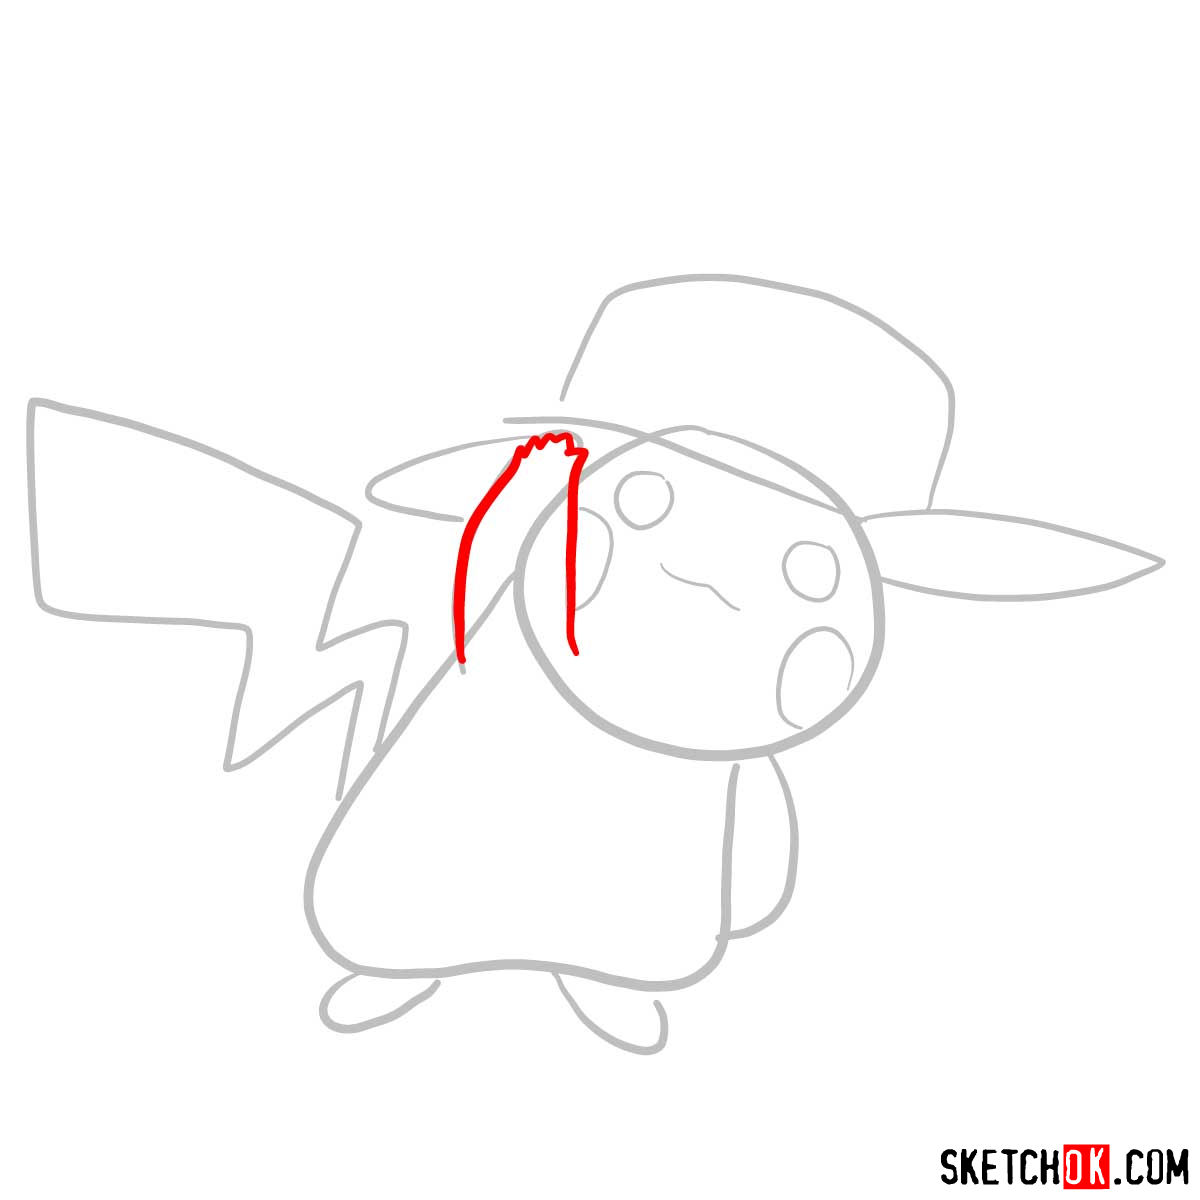 How to draw Pikachu in a cap with pokeball logo - step 03